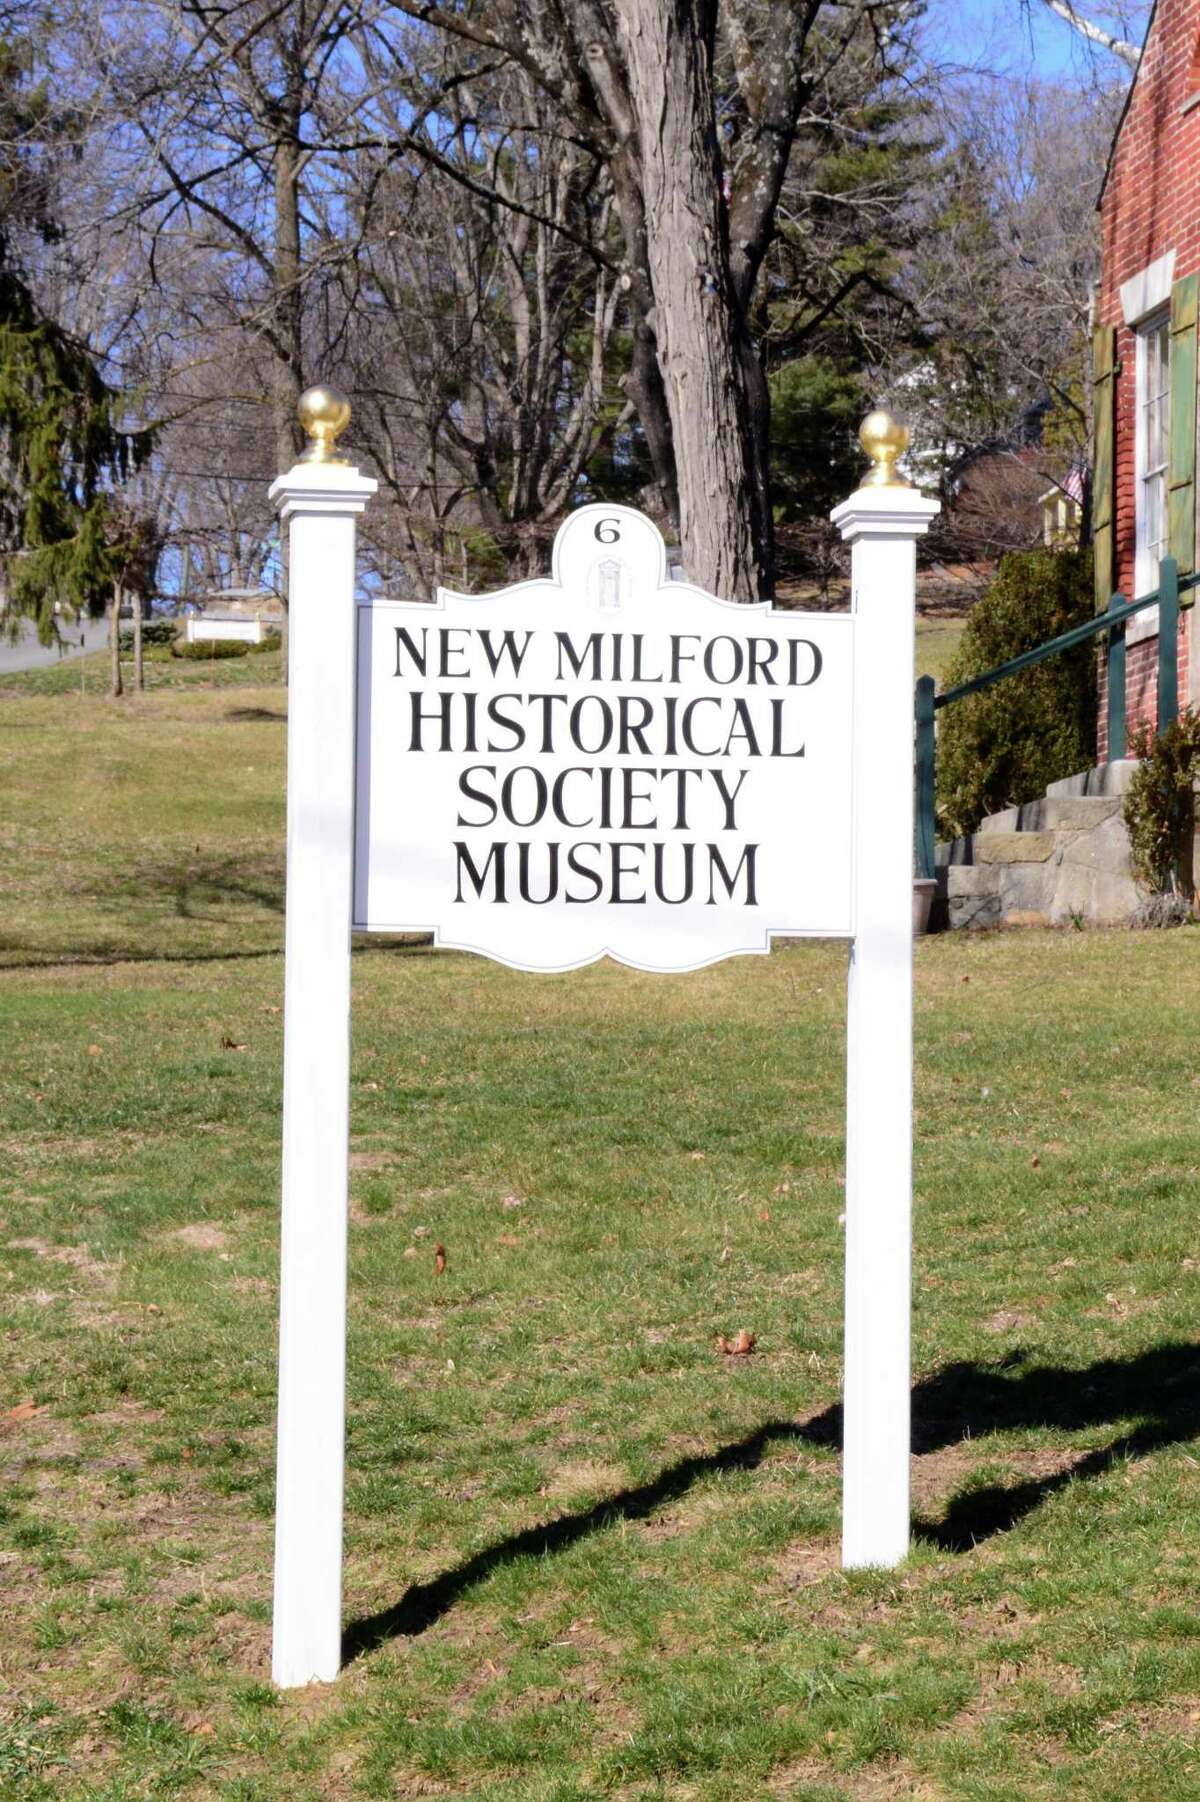 File photo of the New Milford Historical Society museum.